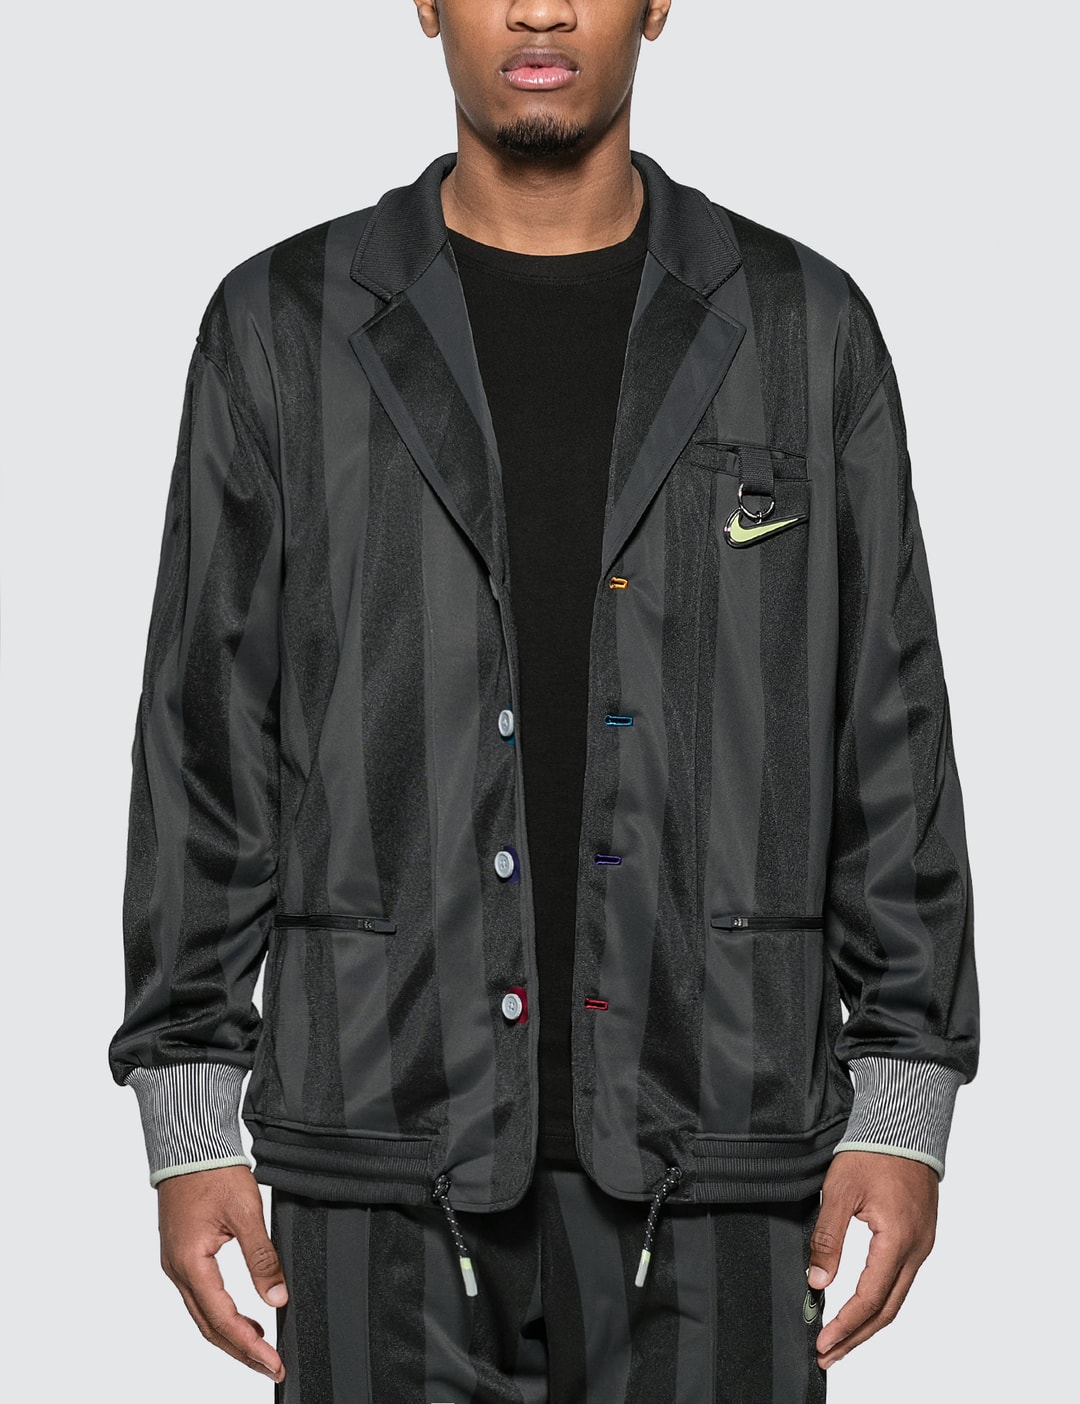 Nike x Pigalle Tearaway Pants Anthracite